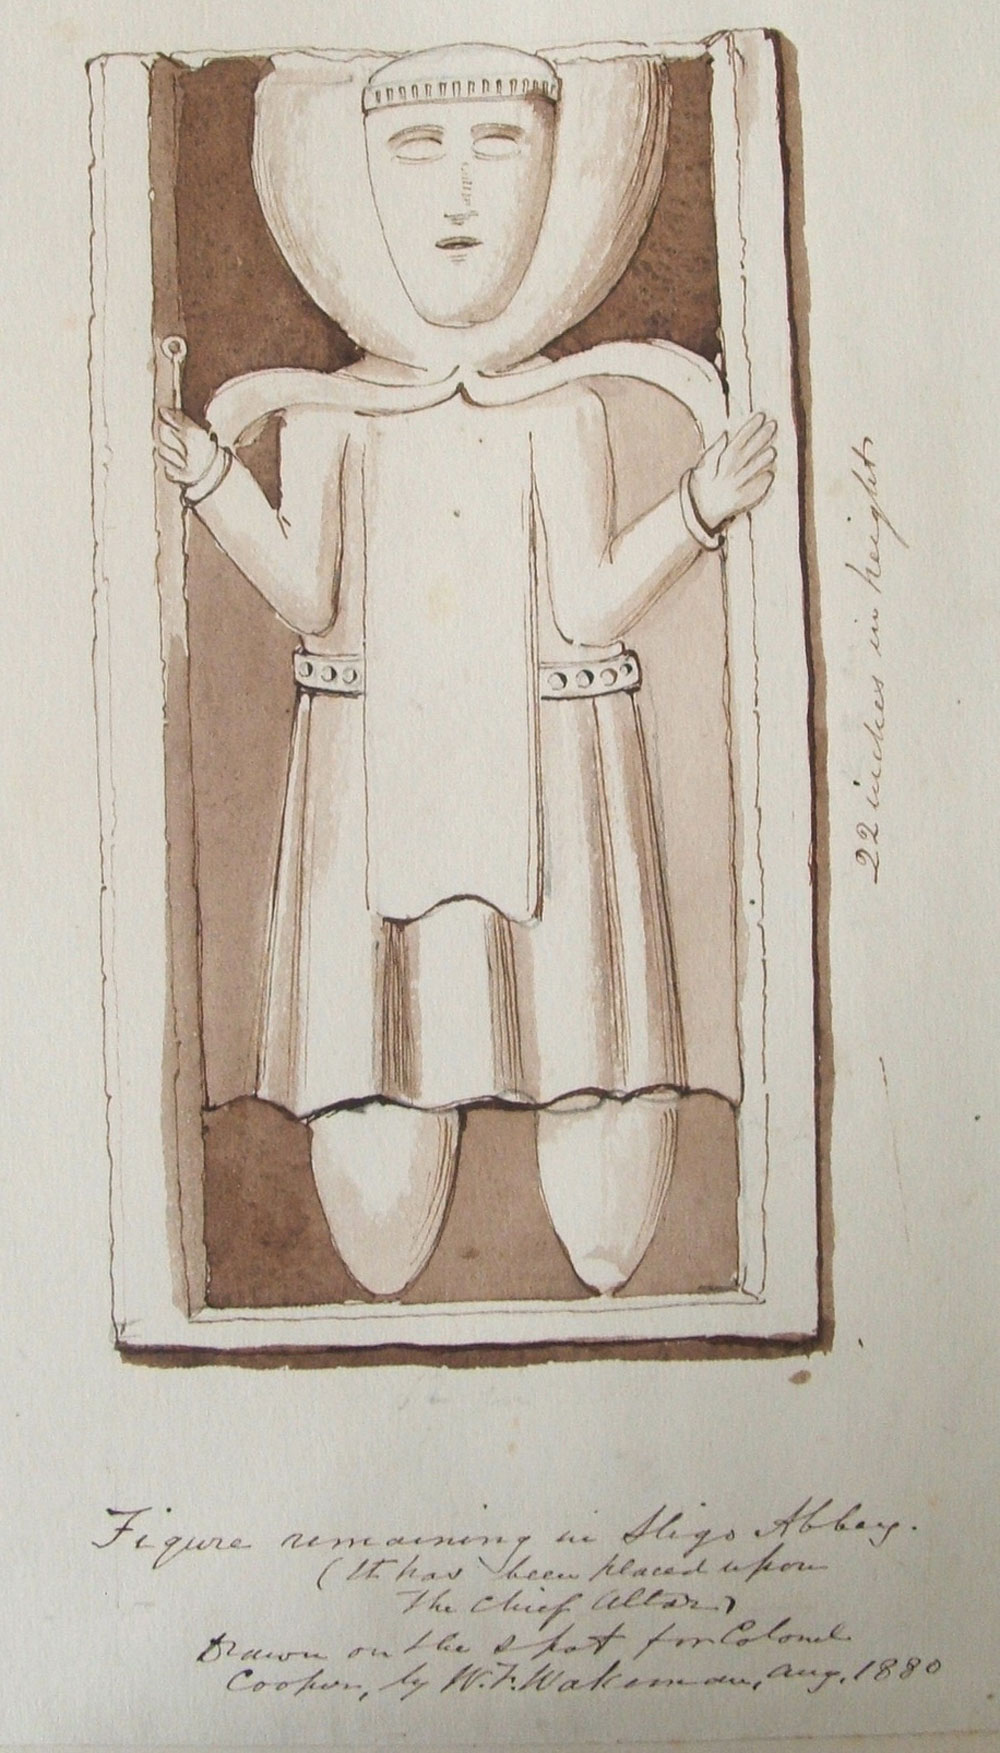 A carving of Saint Domonic, the founder of the Dominican Order of Preaching Friars, which stood on the High Altar of Sligo Abbey for many years, but now stands in the south-west corner of the cloister.